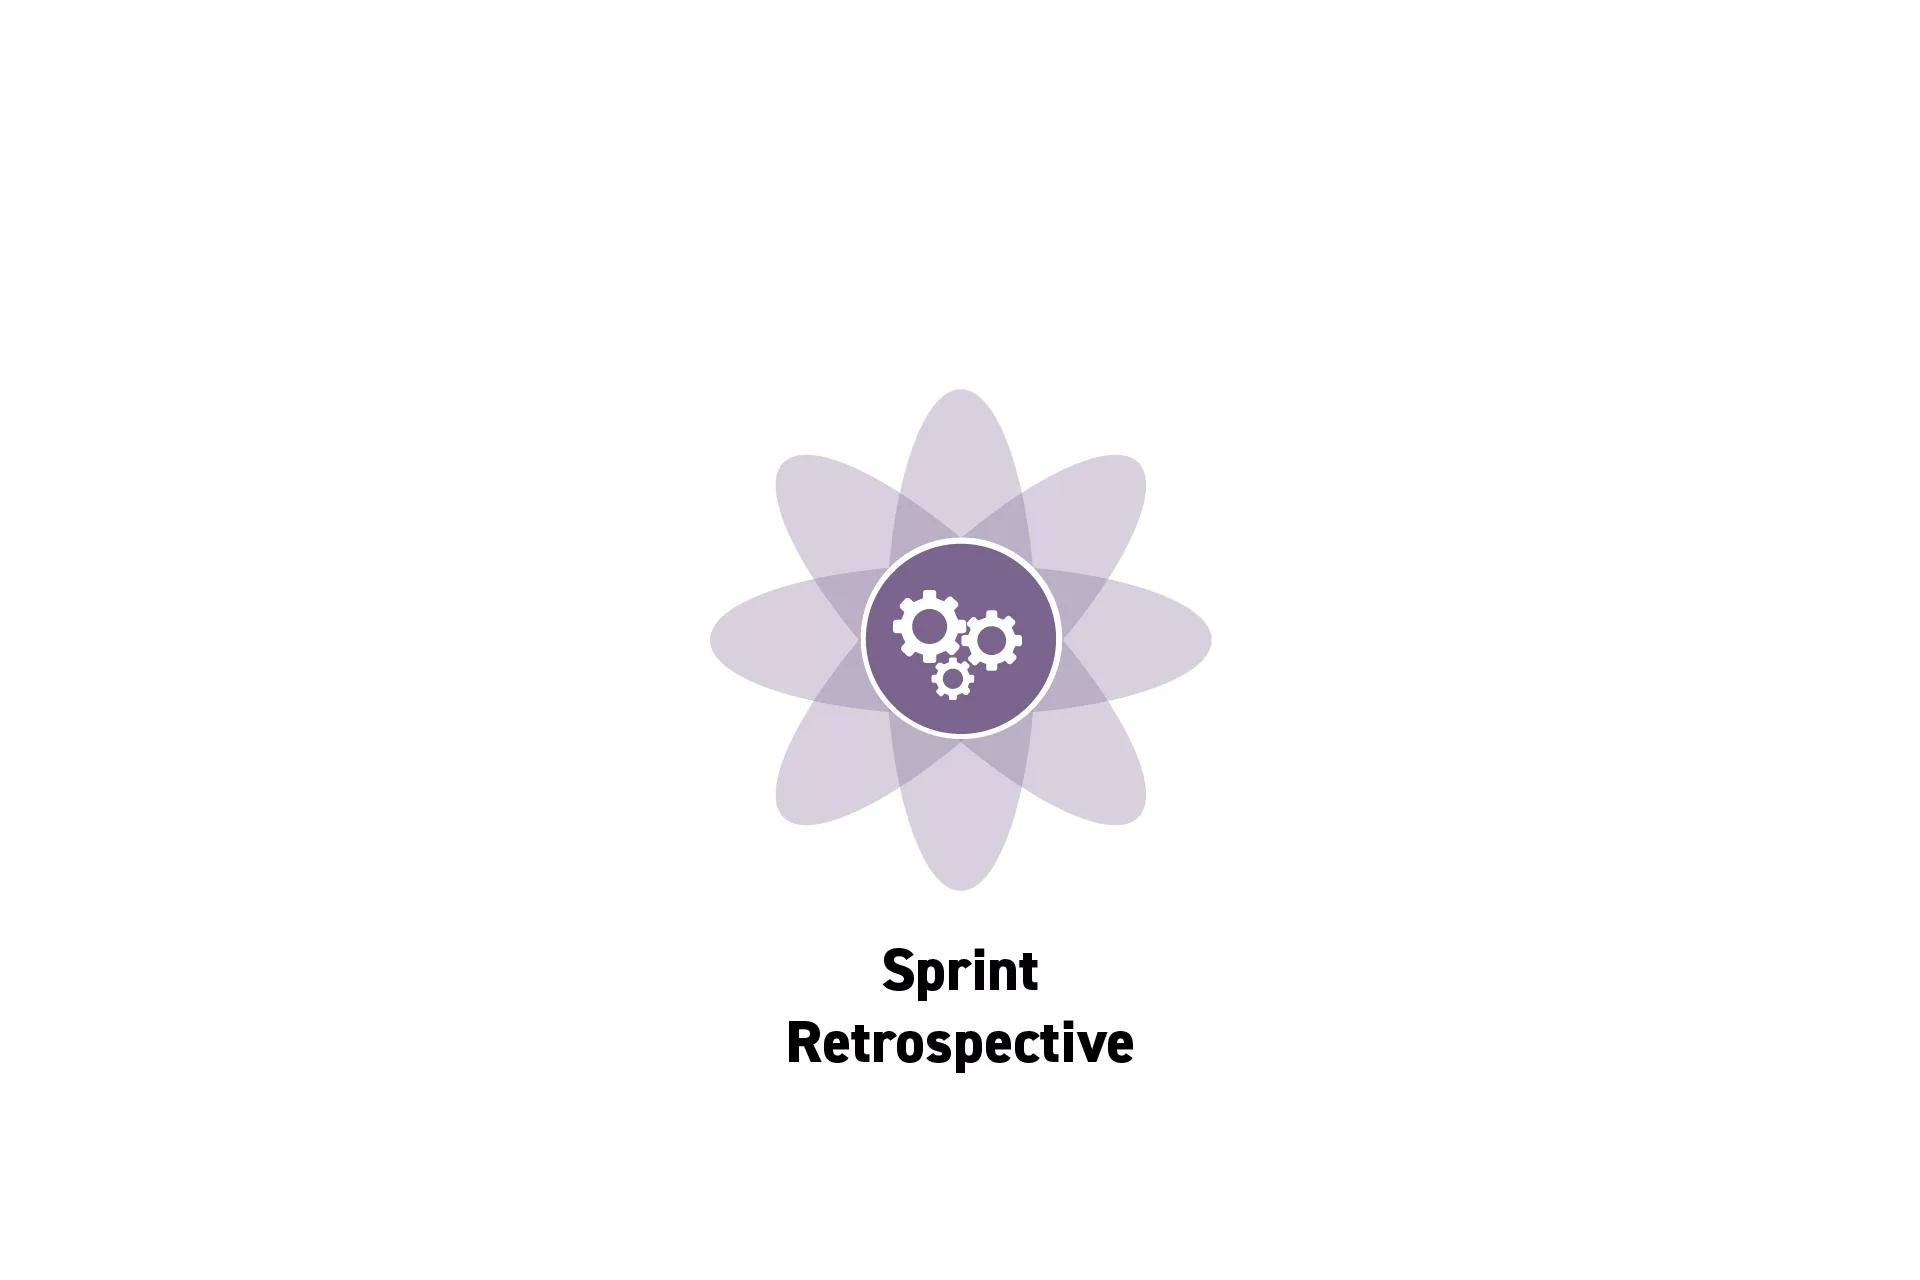 <p>A flower that represents Project Management with the text “Sprint Retrospective” beneath it.</p>